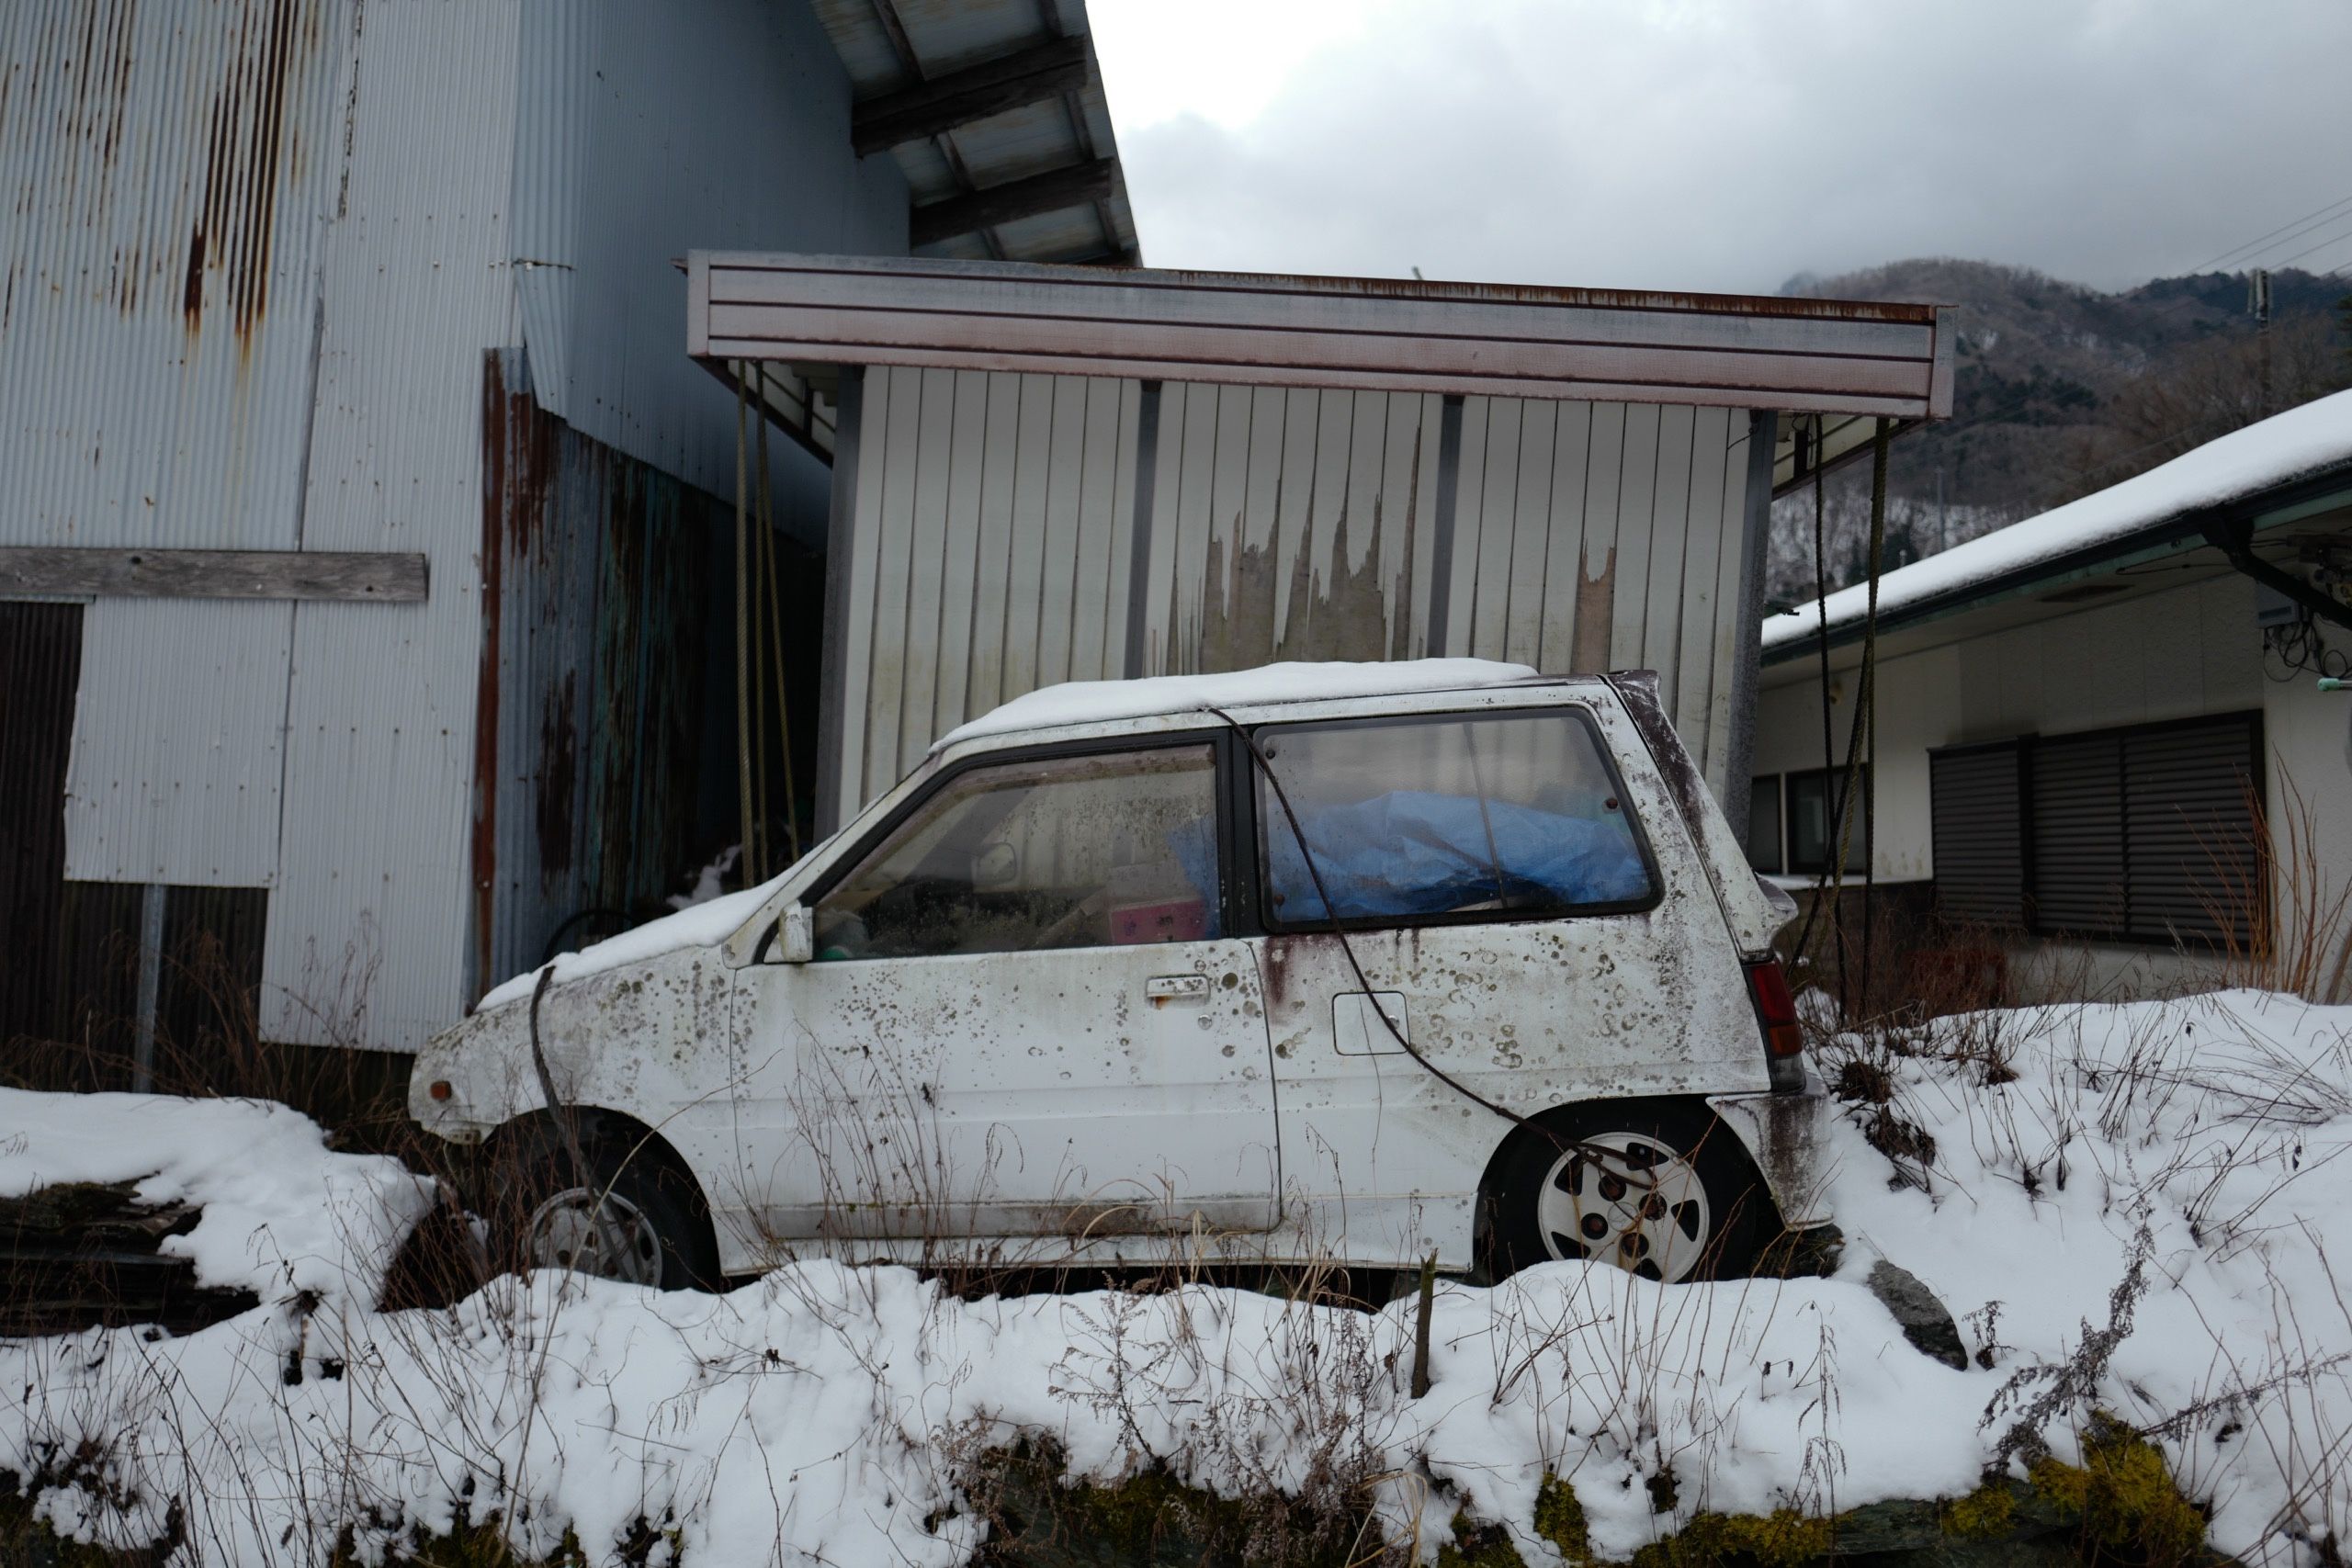 A small, dilapidated white cars parked in a snowy back yard between shacks.